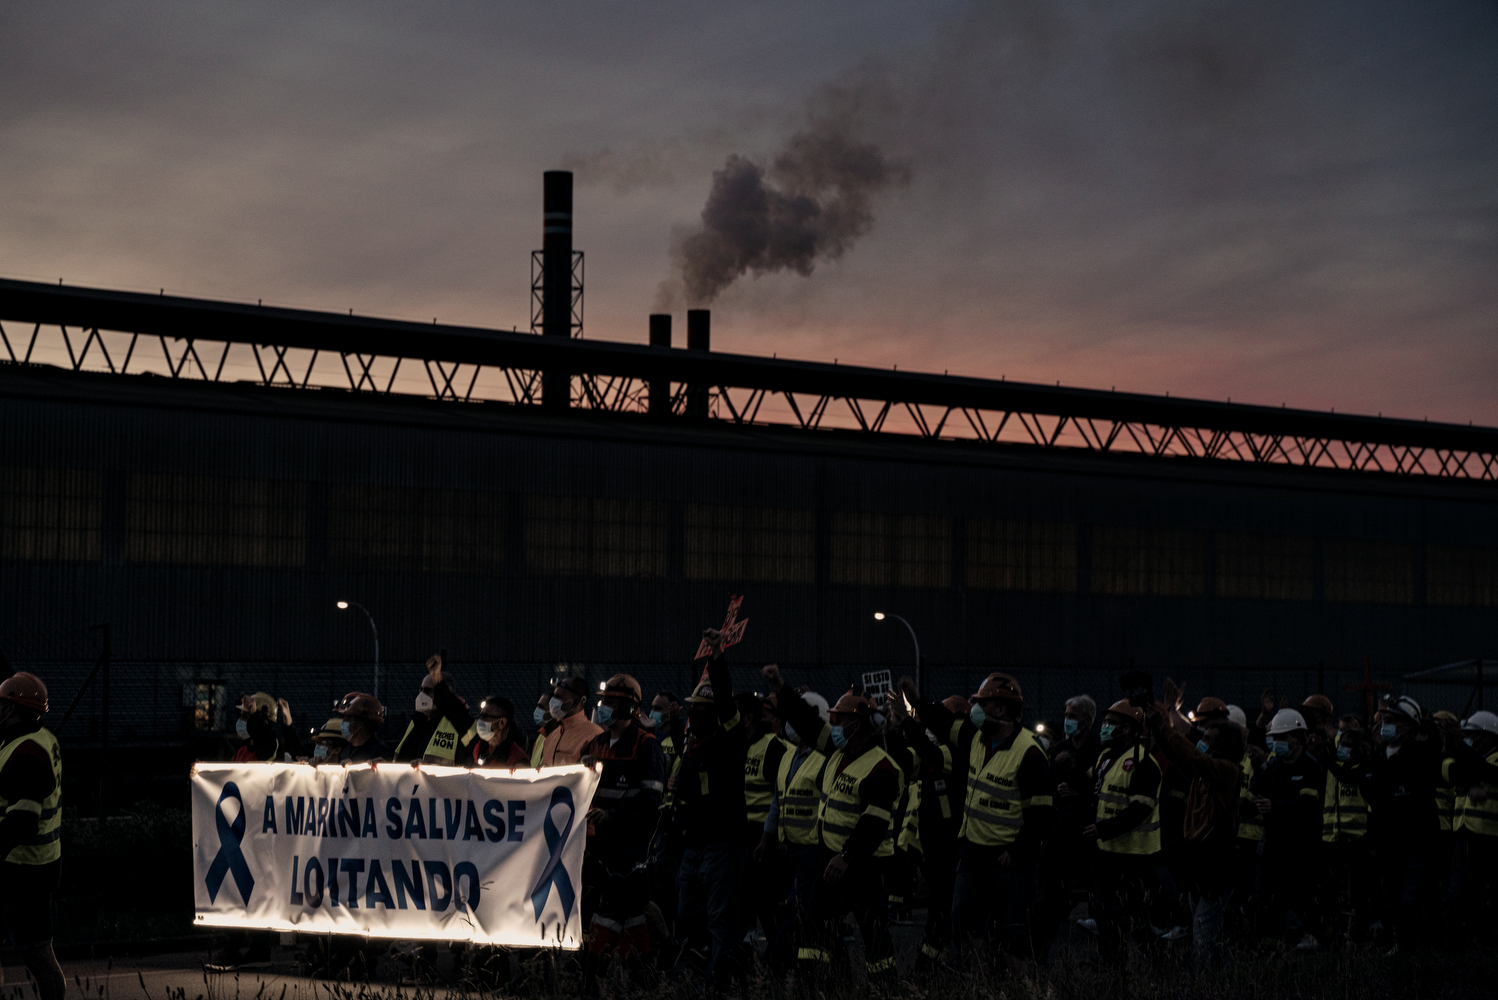 Hundreds of workers march from the factory gates with lights and torches, with the aim of making their uncertain situation visible in the face of the dismissal of hundreds of workers.